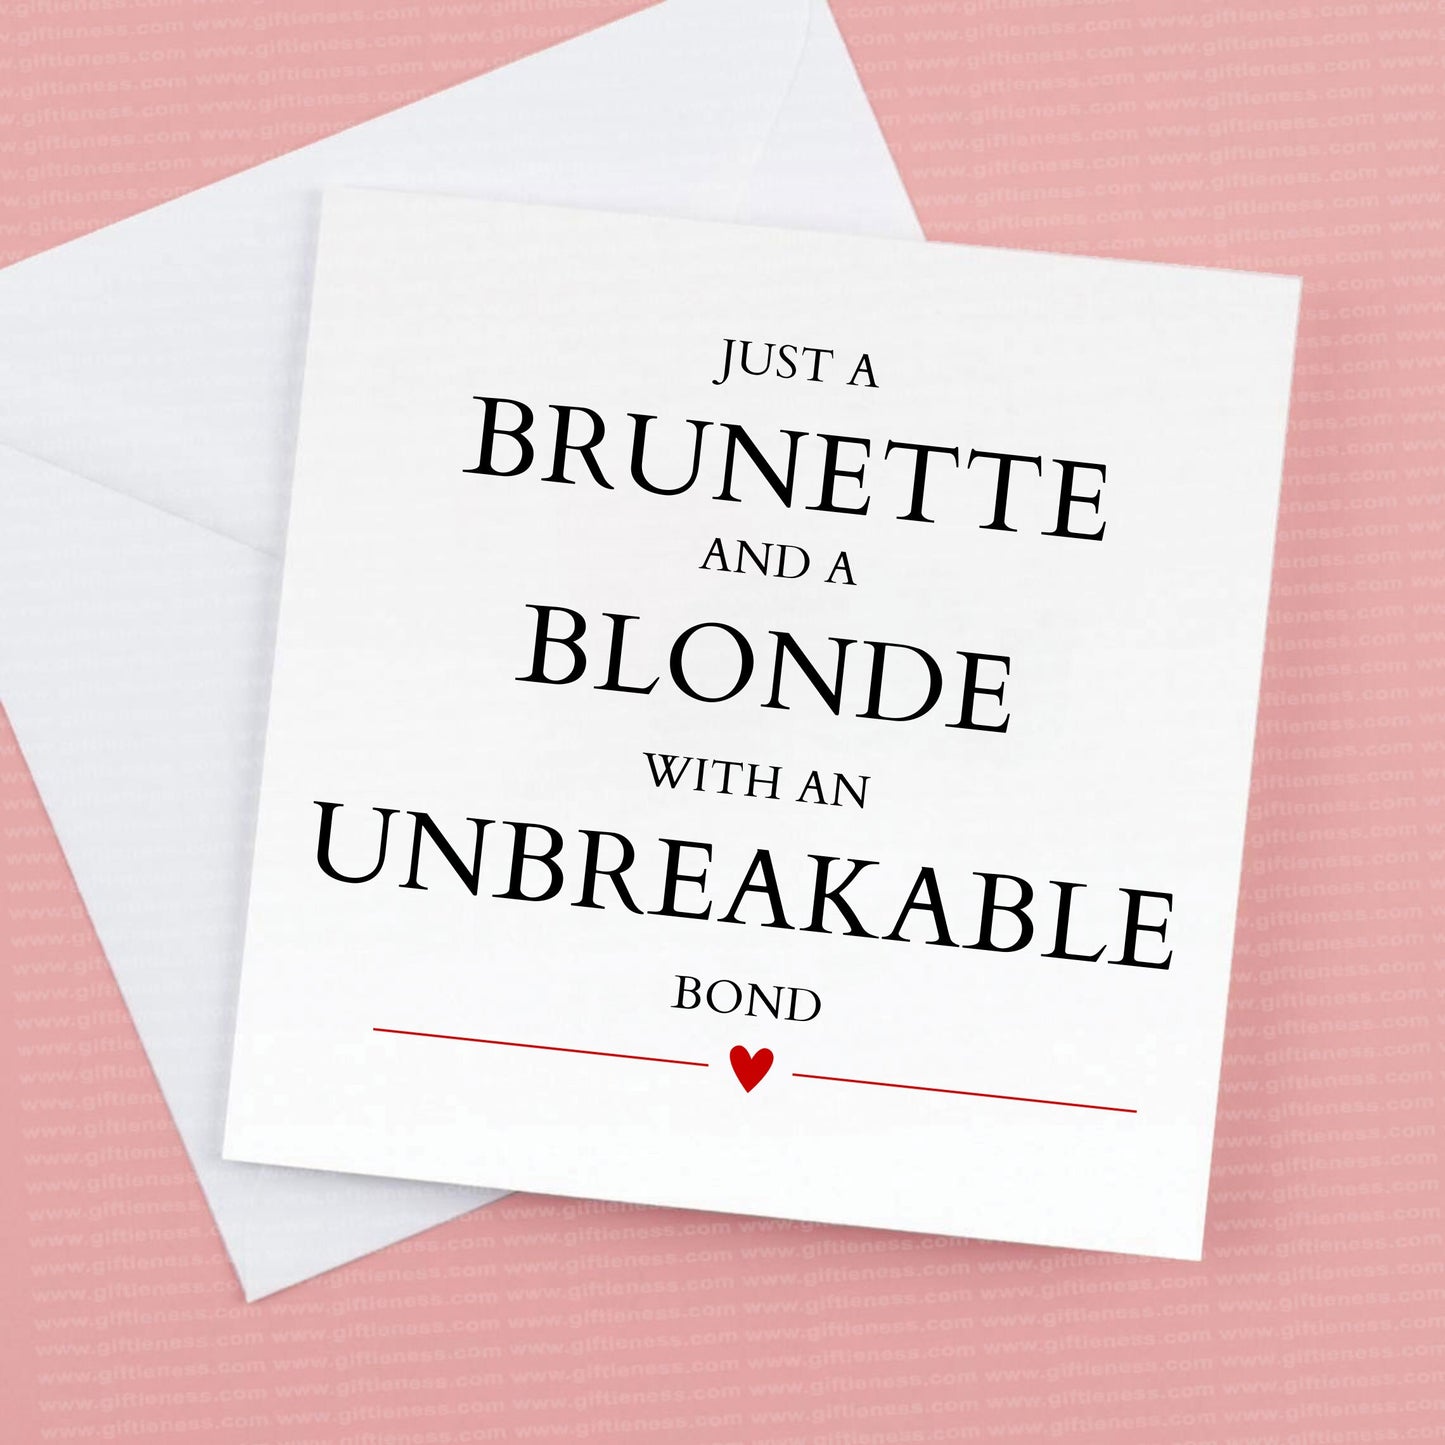 Just a Blonde and a brunette with an unbreakable bond birthday card and envelope